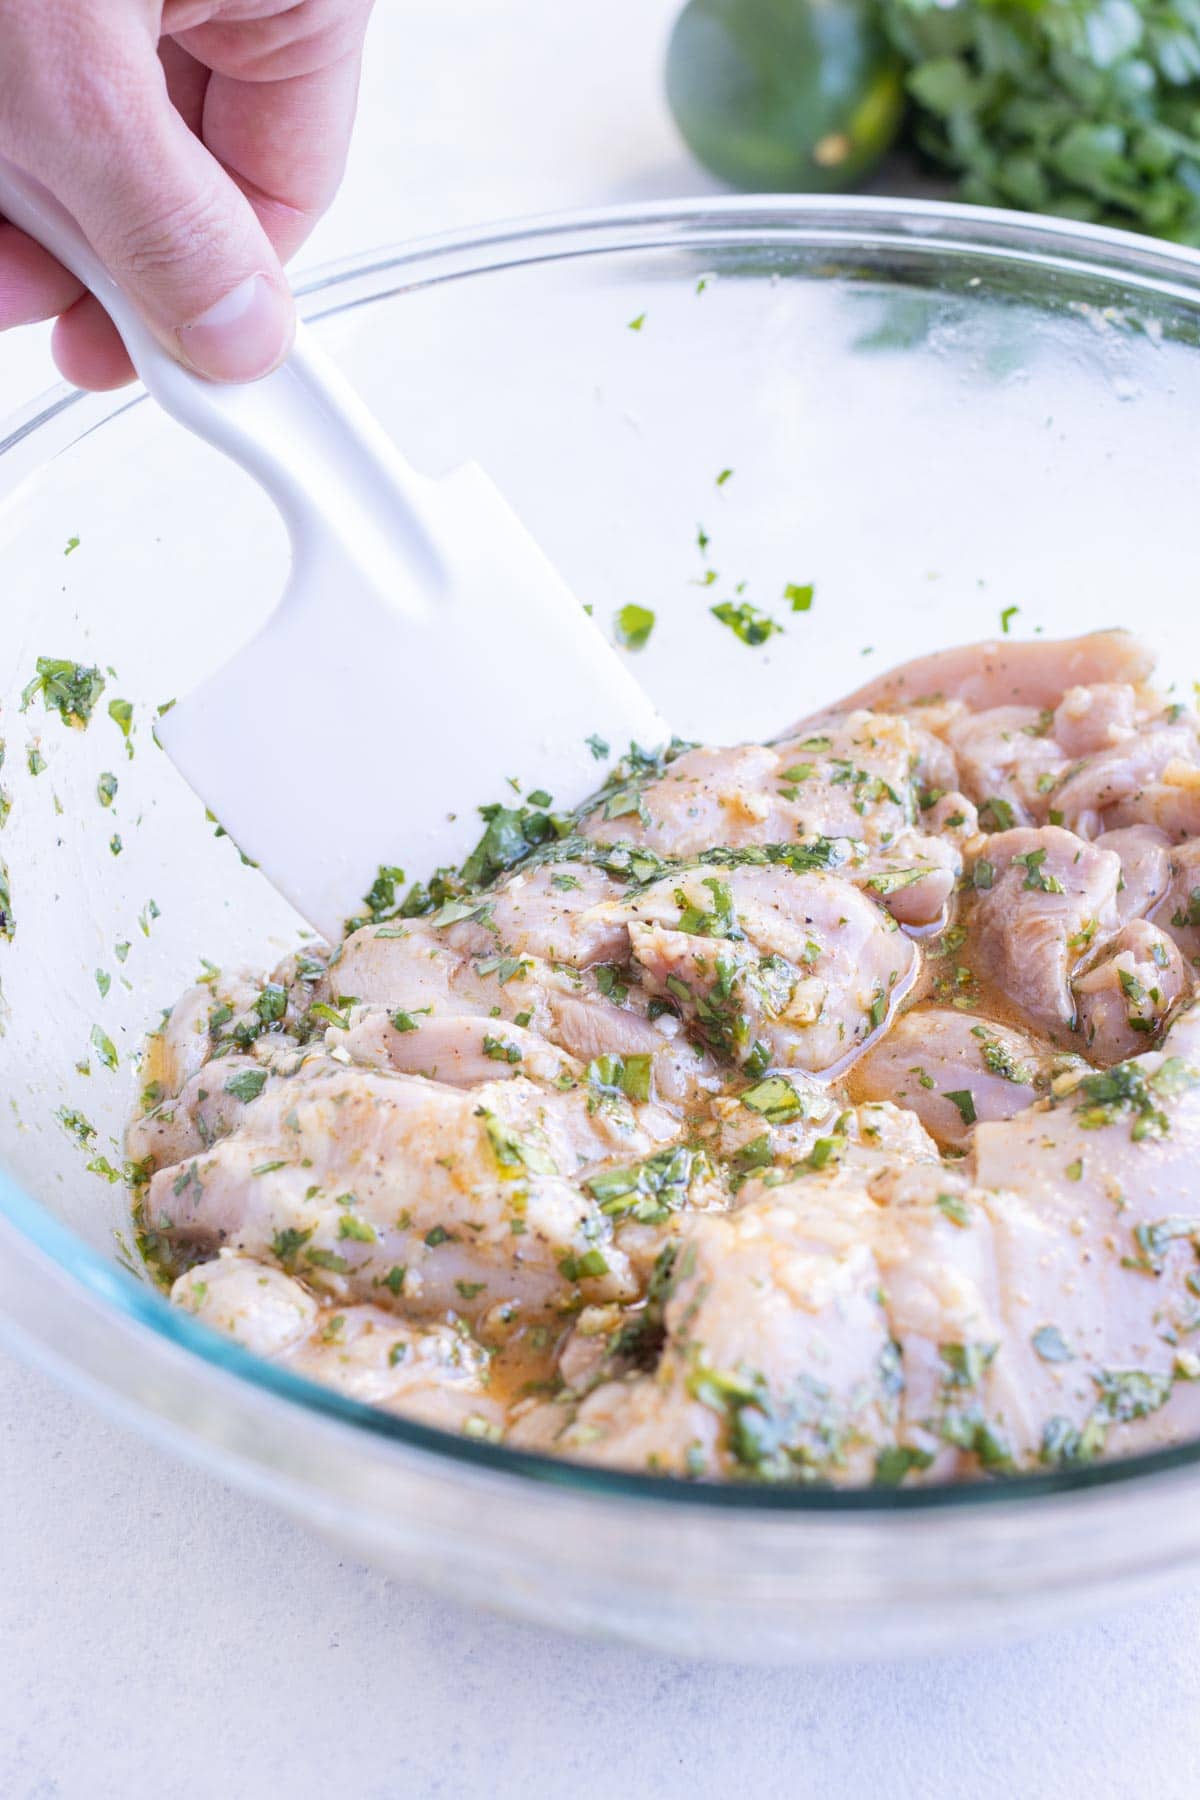 Chicken thighs are mixed into the marinade.